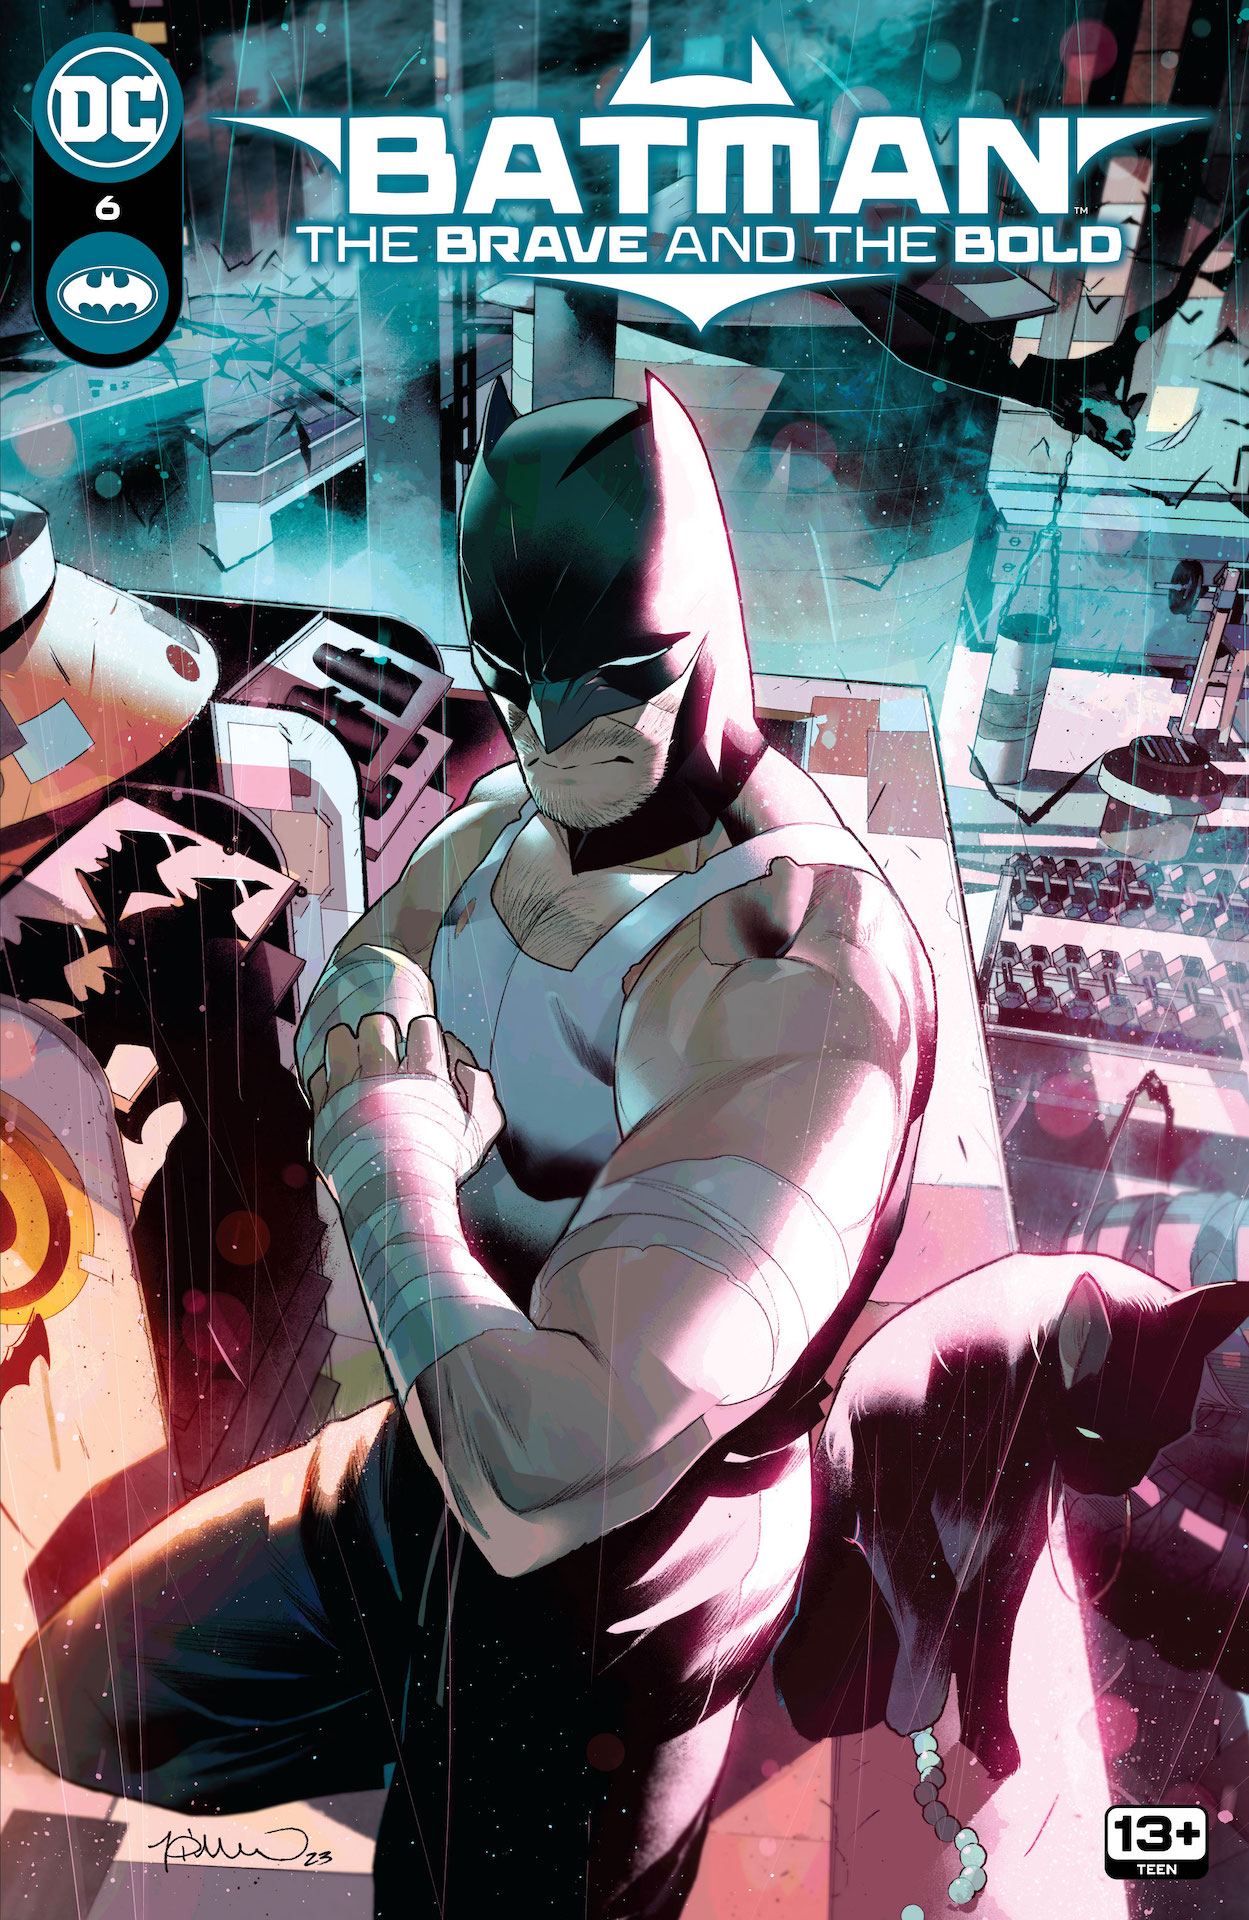 DC Preview: Batman: The Brave and the Bold #6